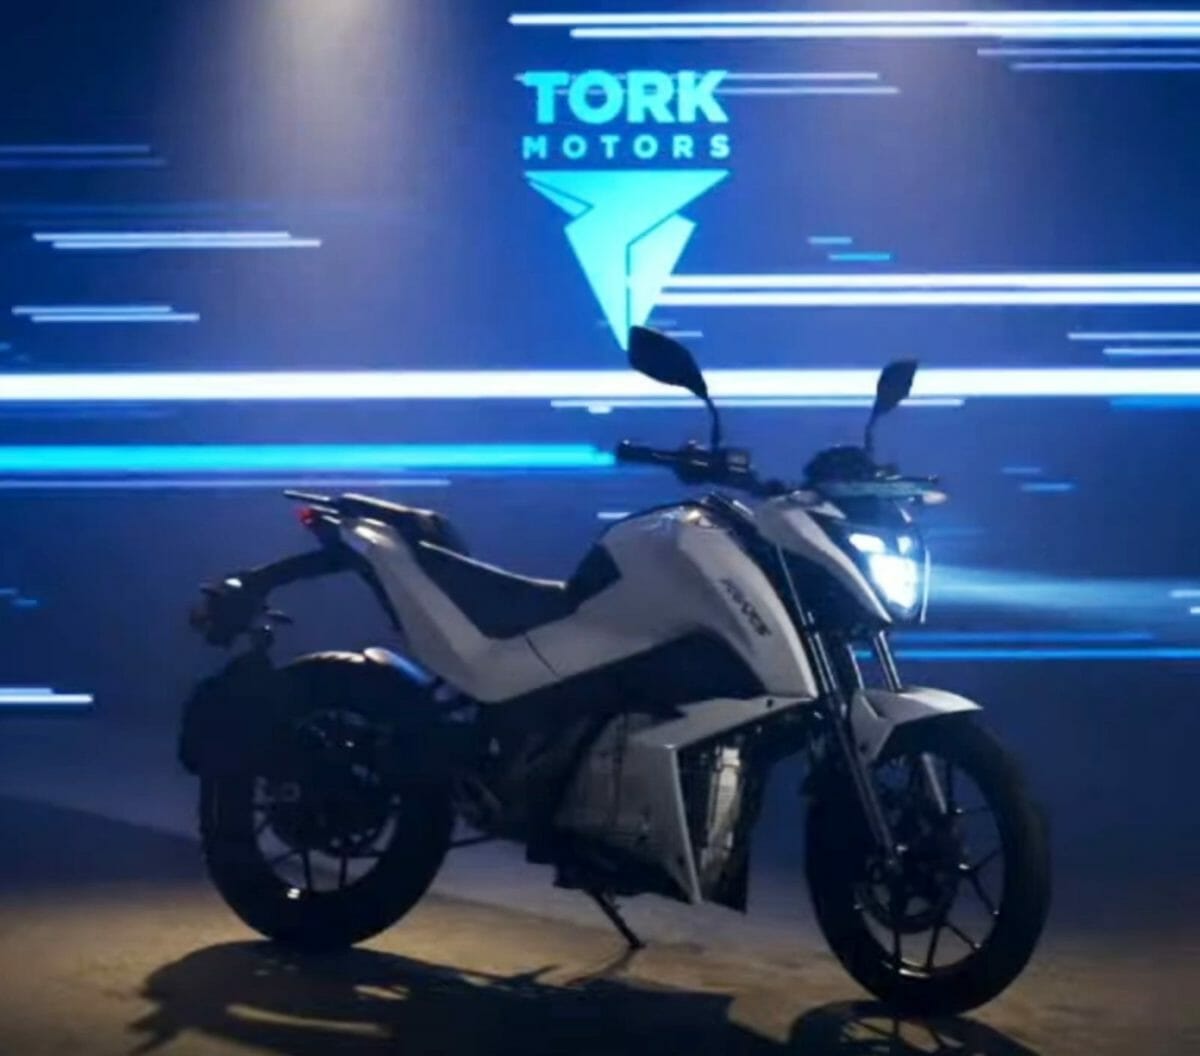 Tork Kratos launched